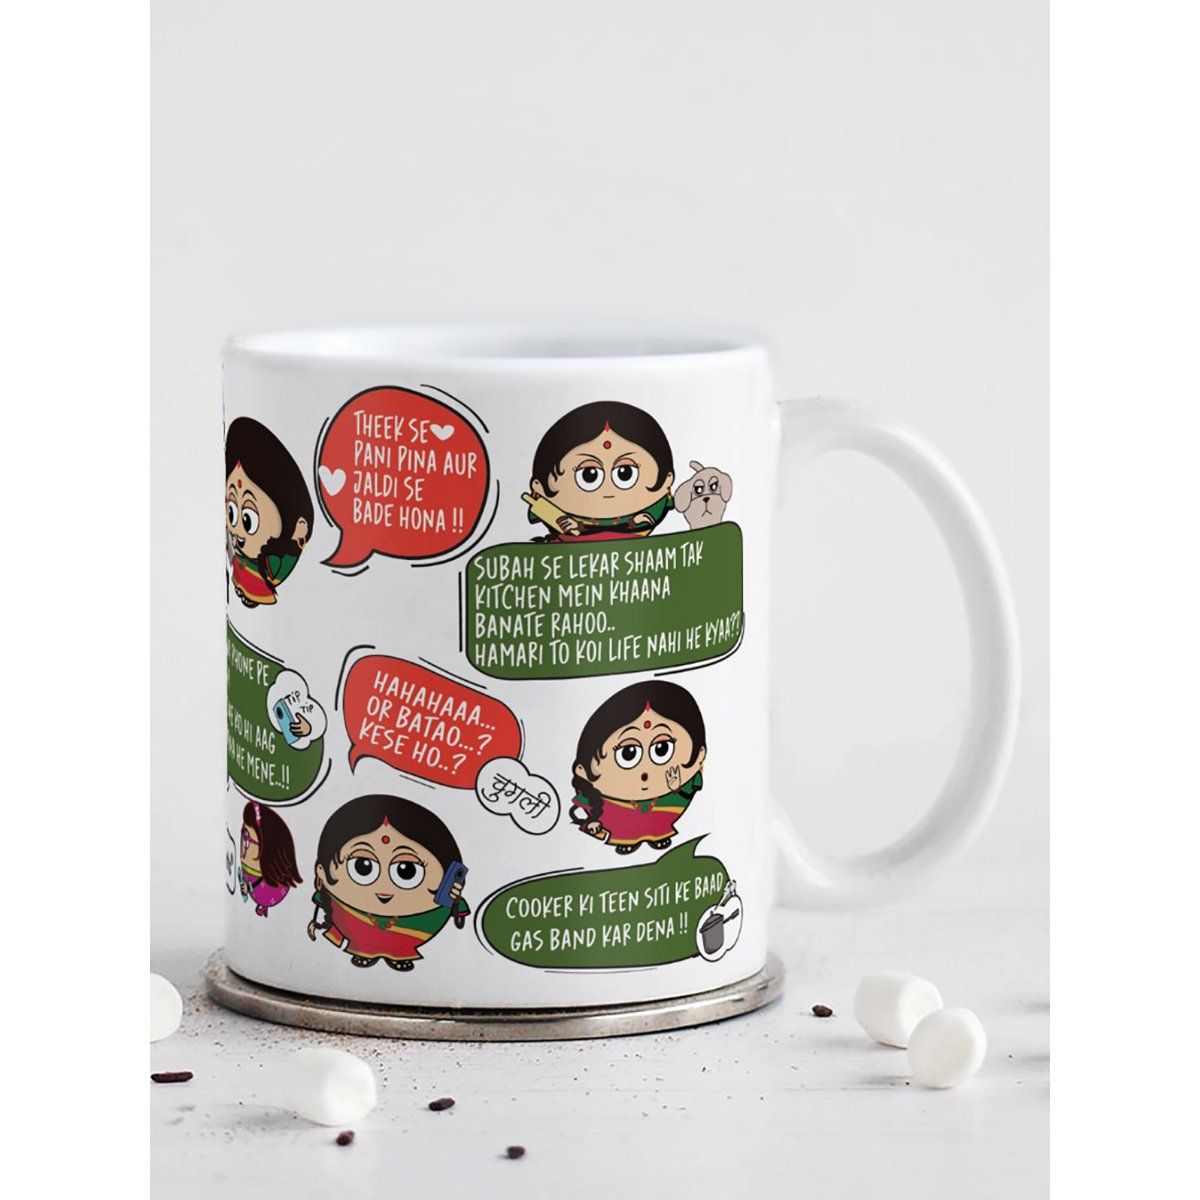 Buy Monica I Love You Ceramic Coffee Name Mug Online at Low Prices in India  